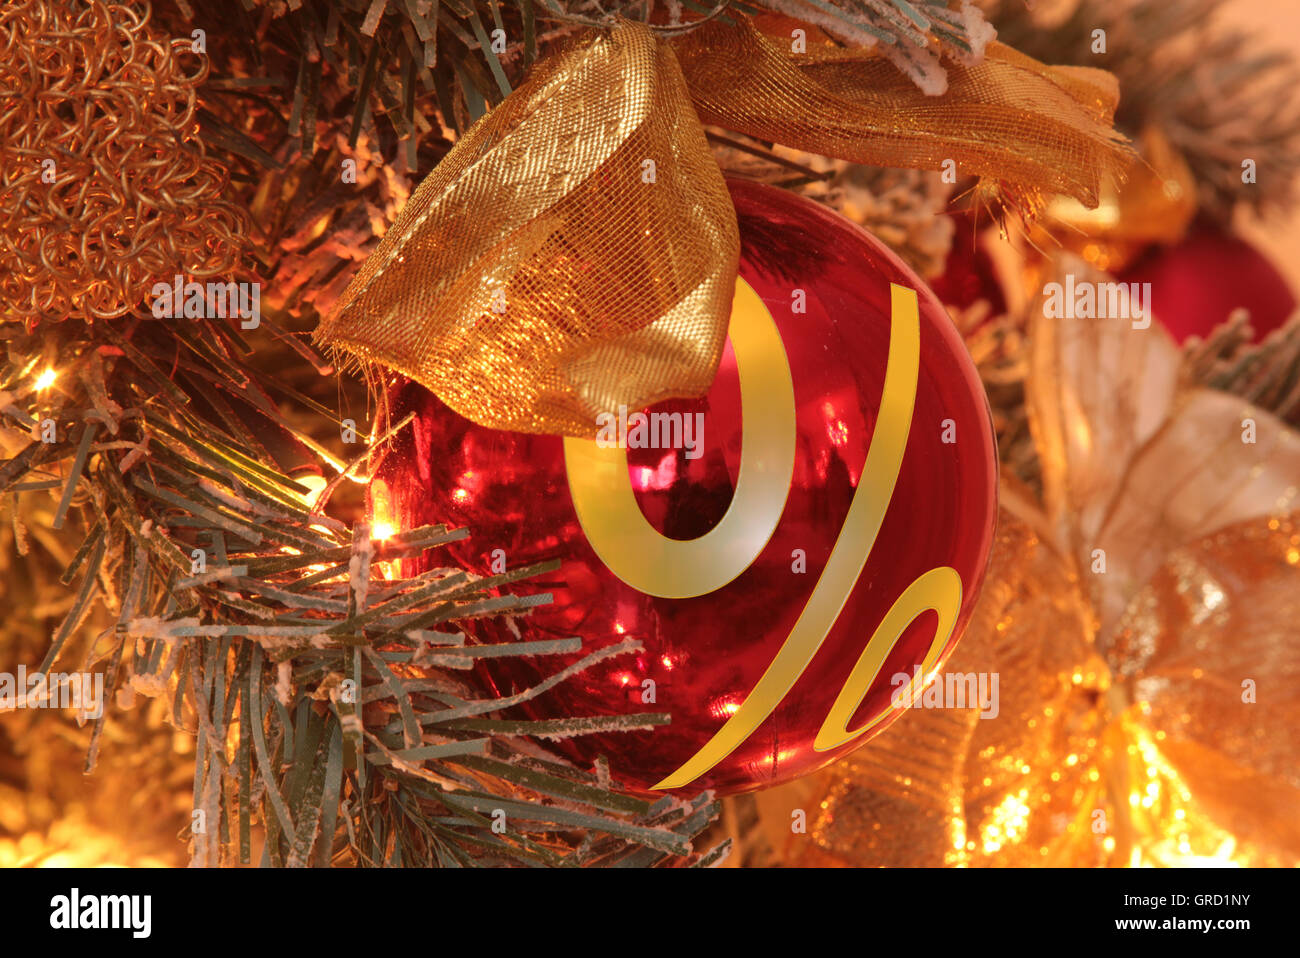 Christmas Tree Ornament With Percentage Sign Stock Photo